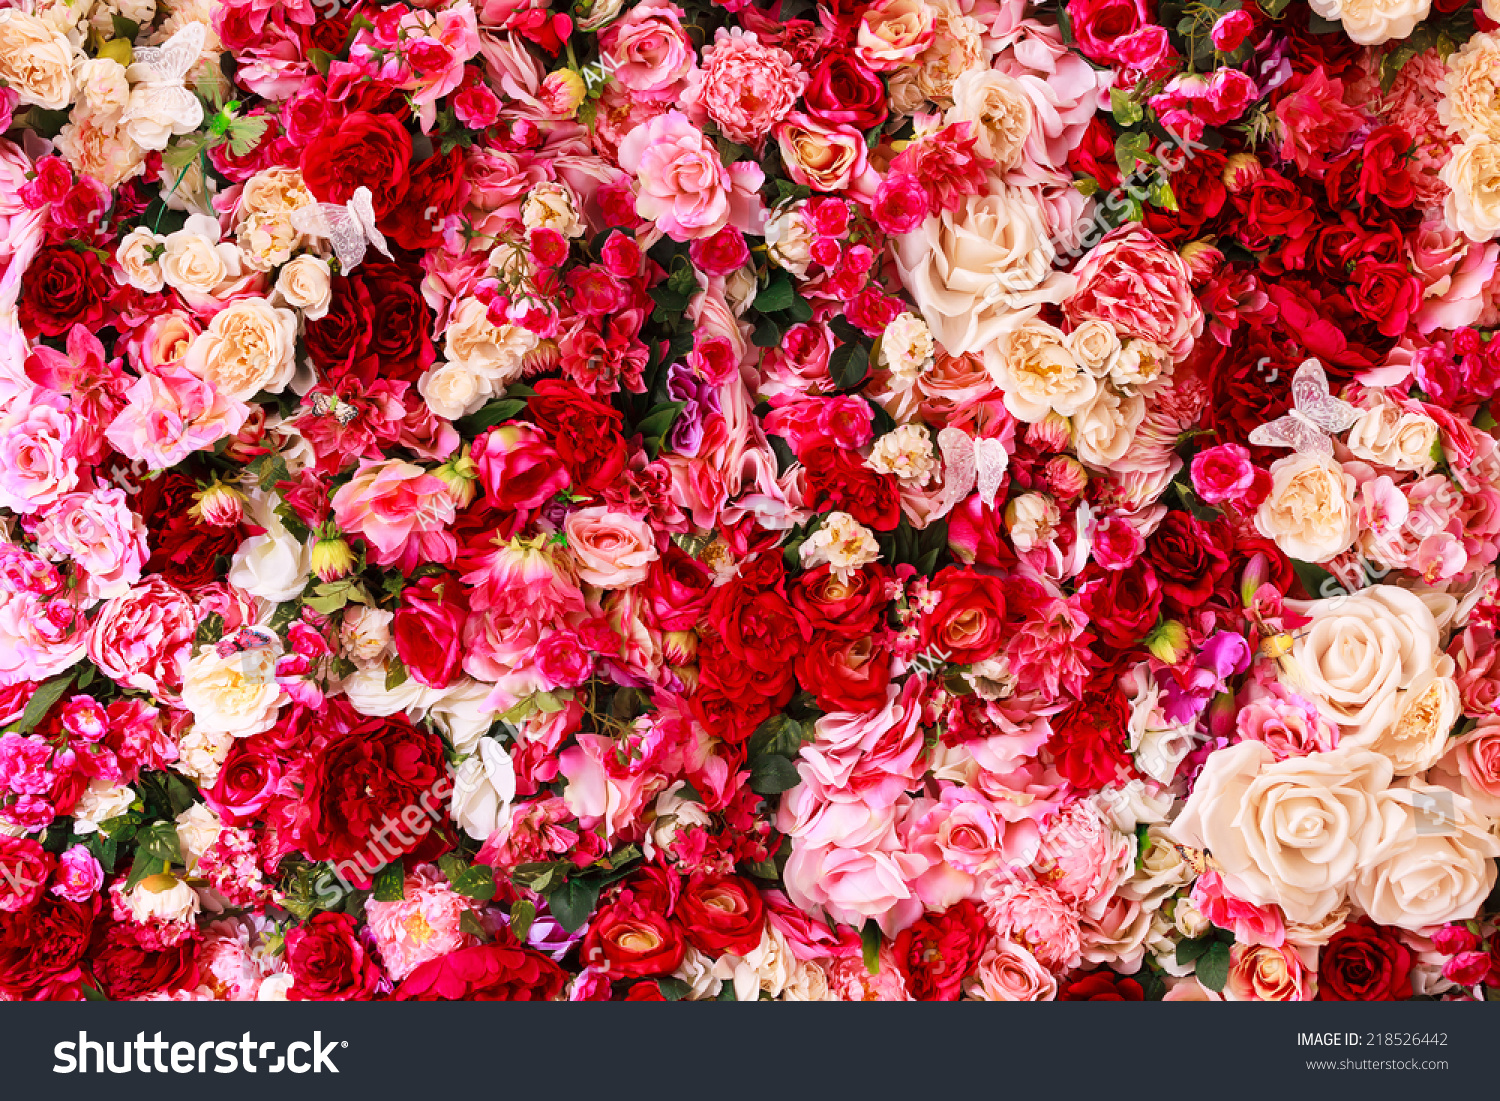 Floral Background Stock Photo 218526442 : Shutterstock